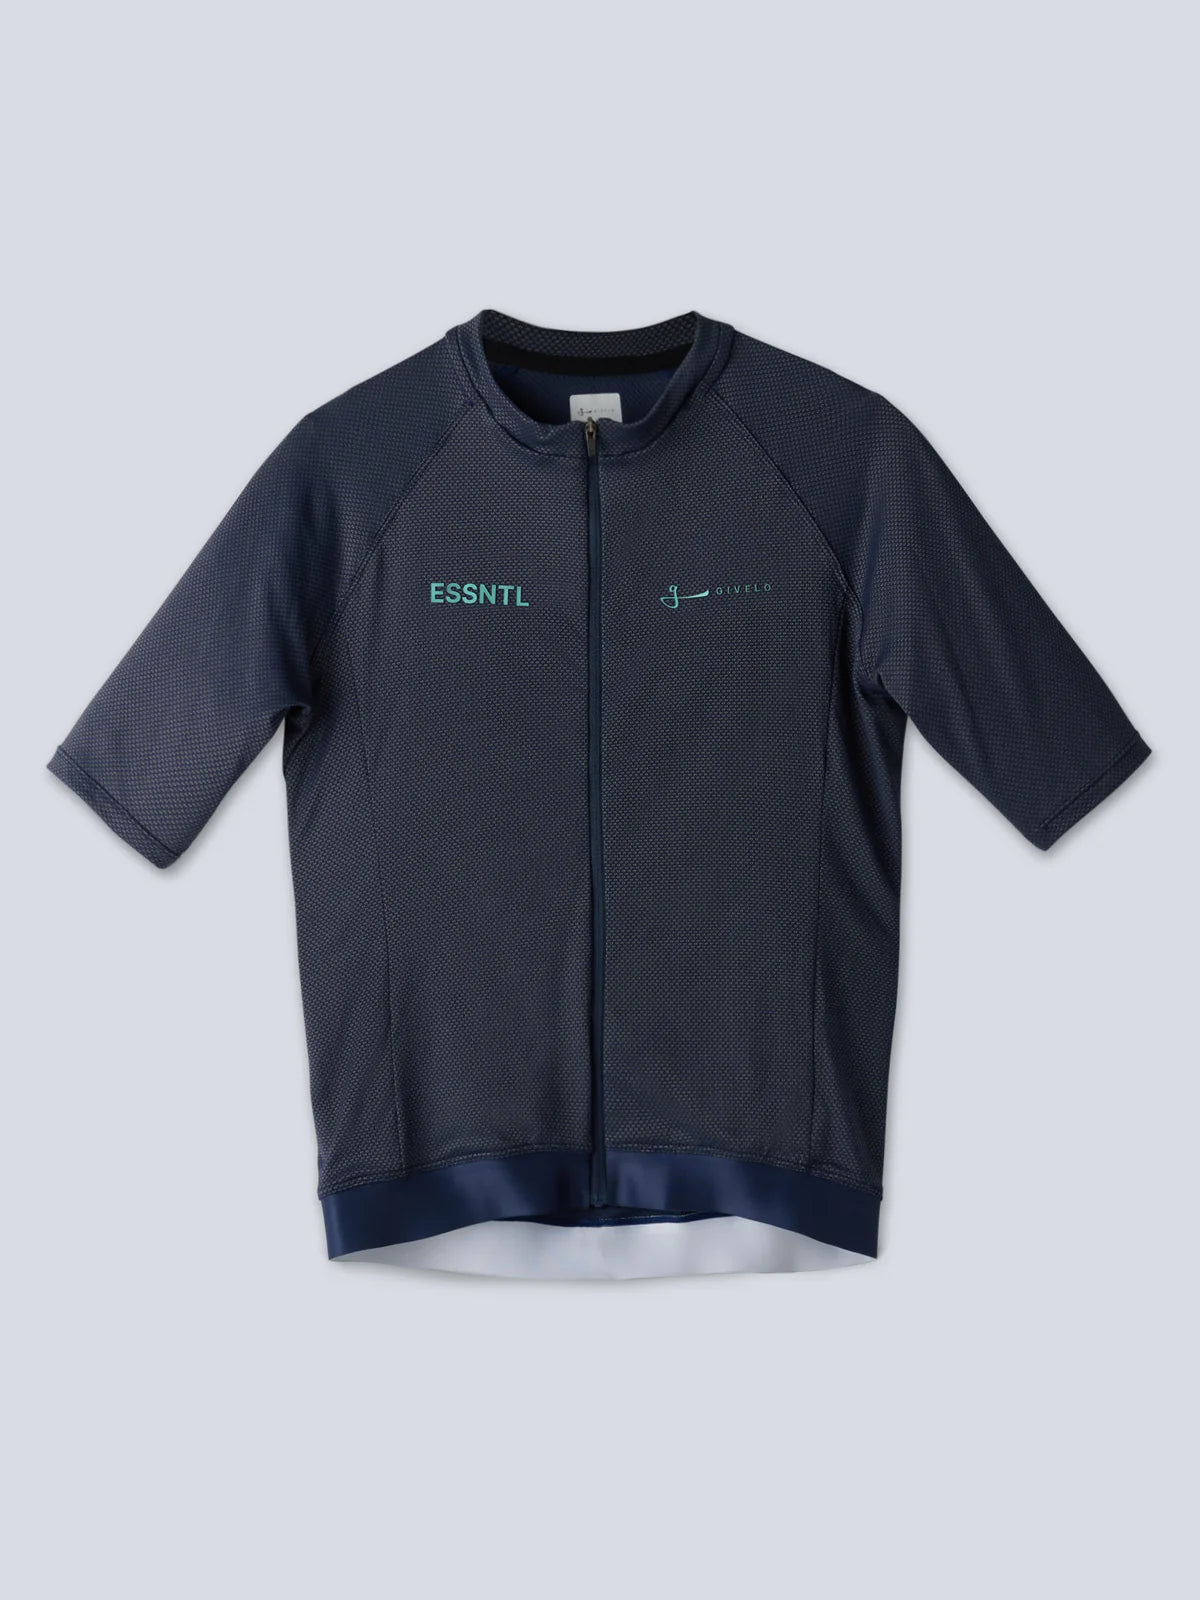 Givelo - Maillot Court Graphene Maillots Givelo XS Navy 